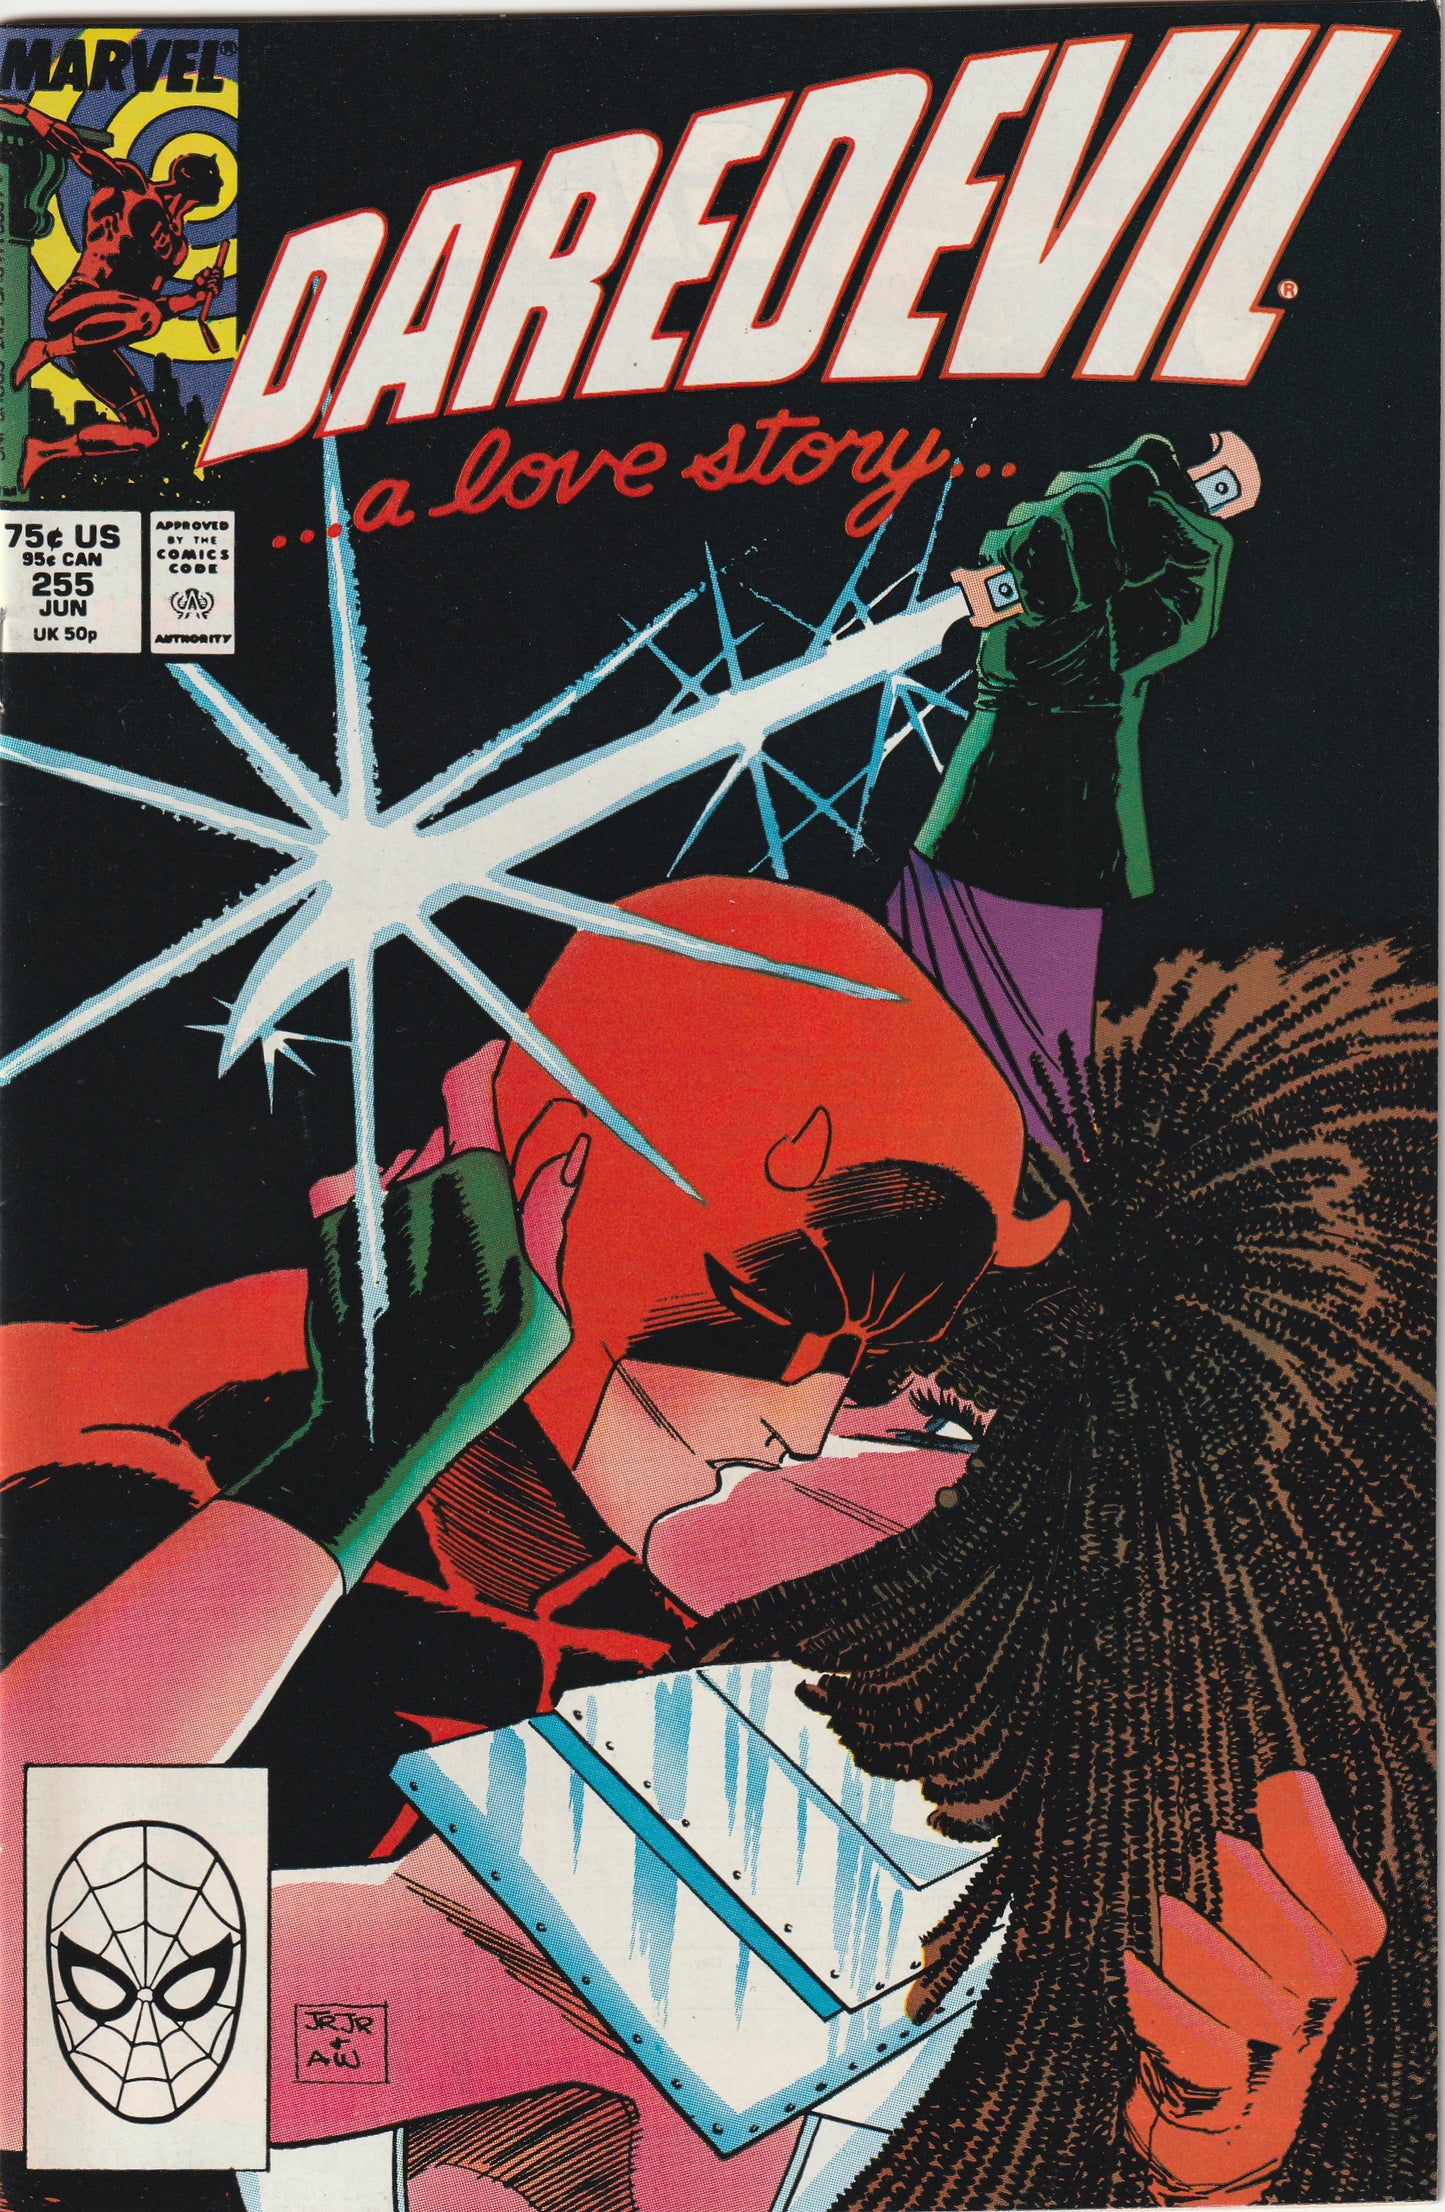 Daredevil #255 (1988) - 2nd Appearance of Typhoid Mary